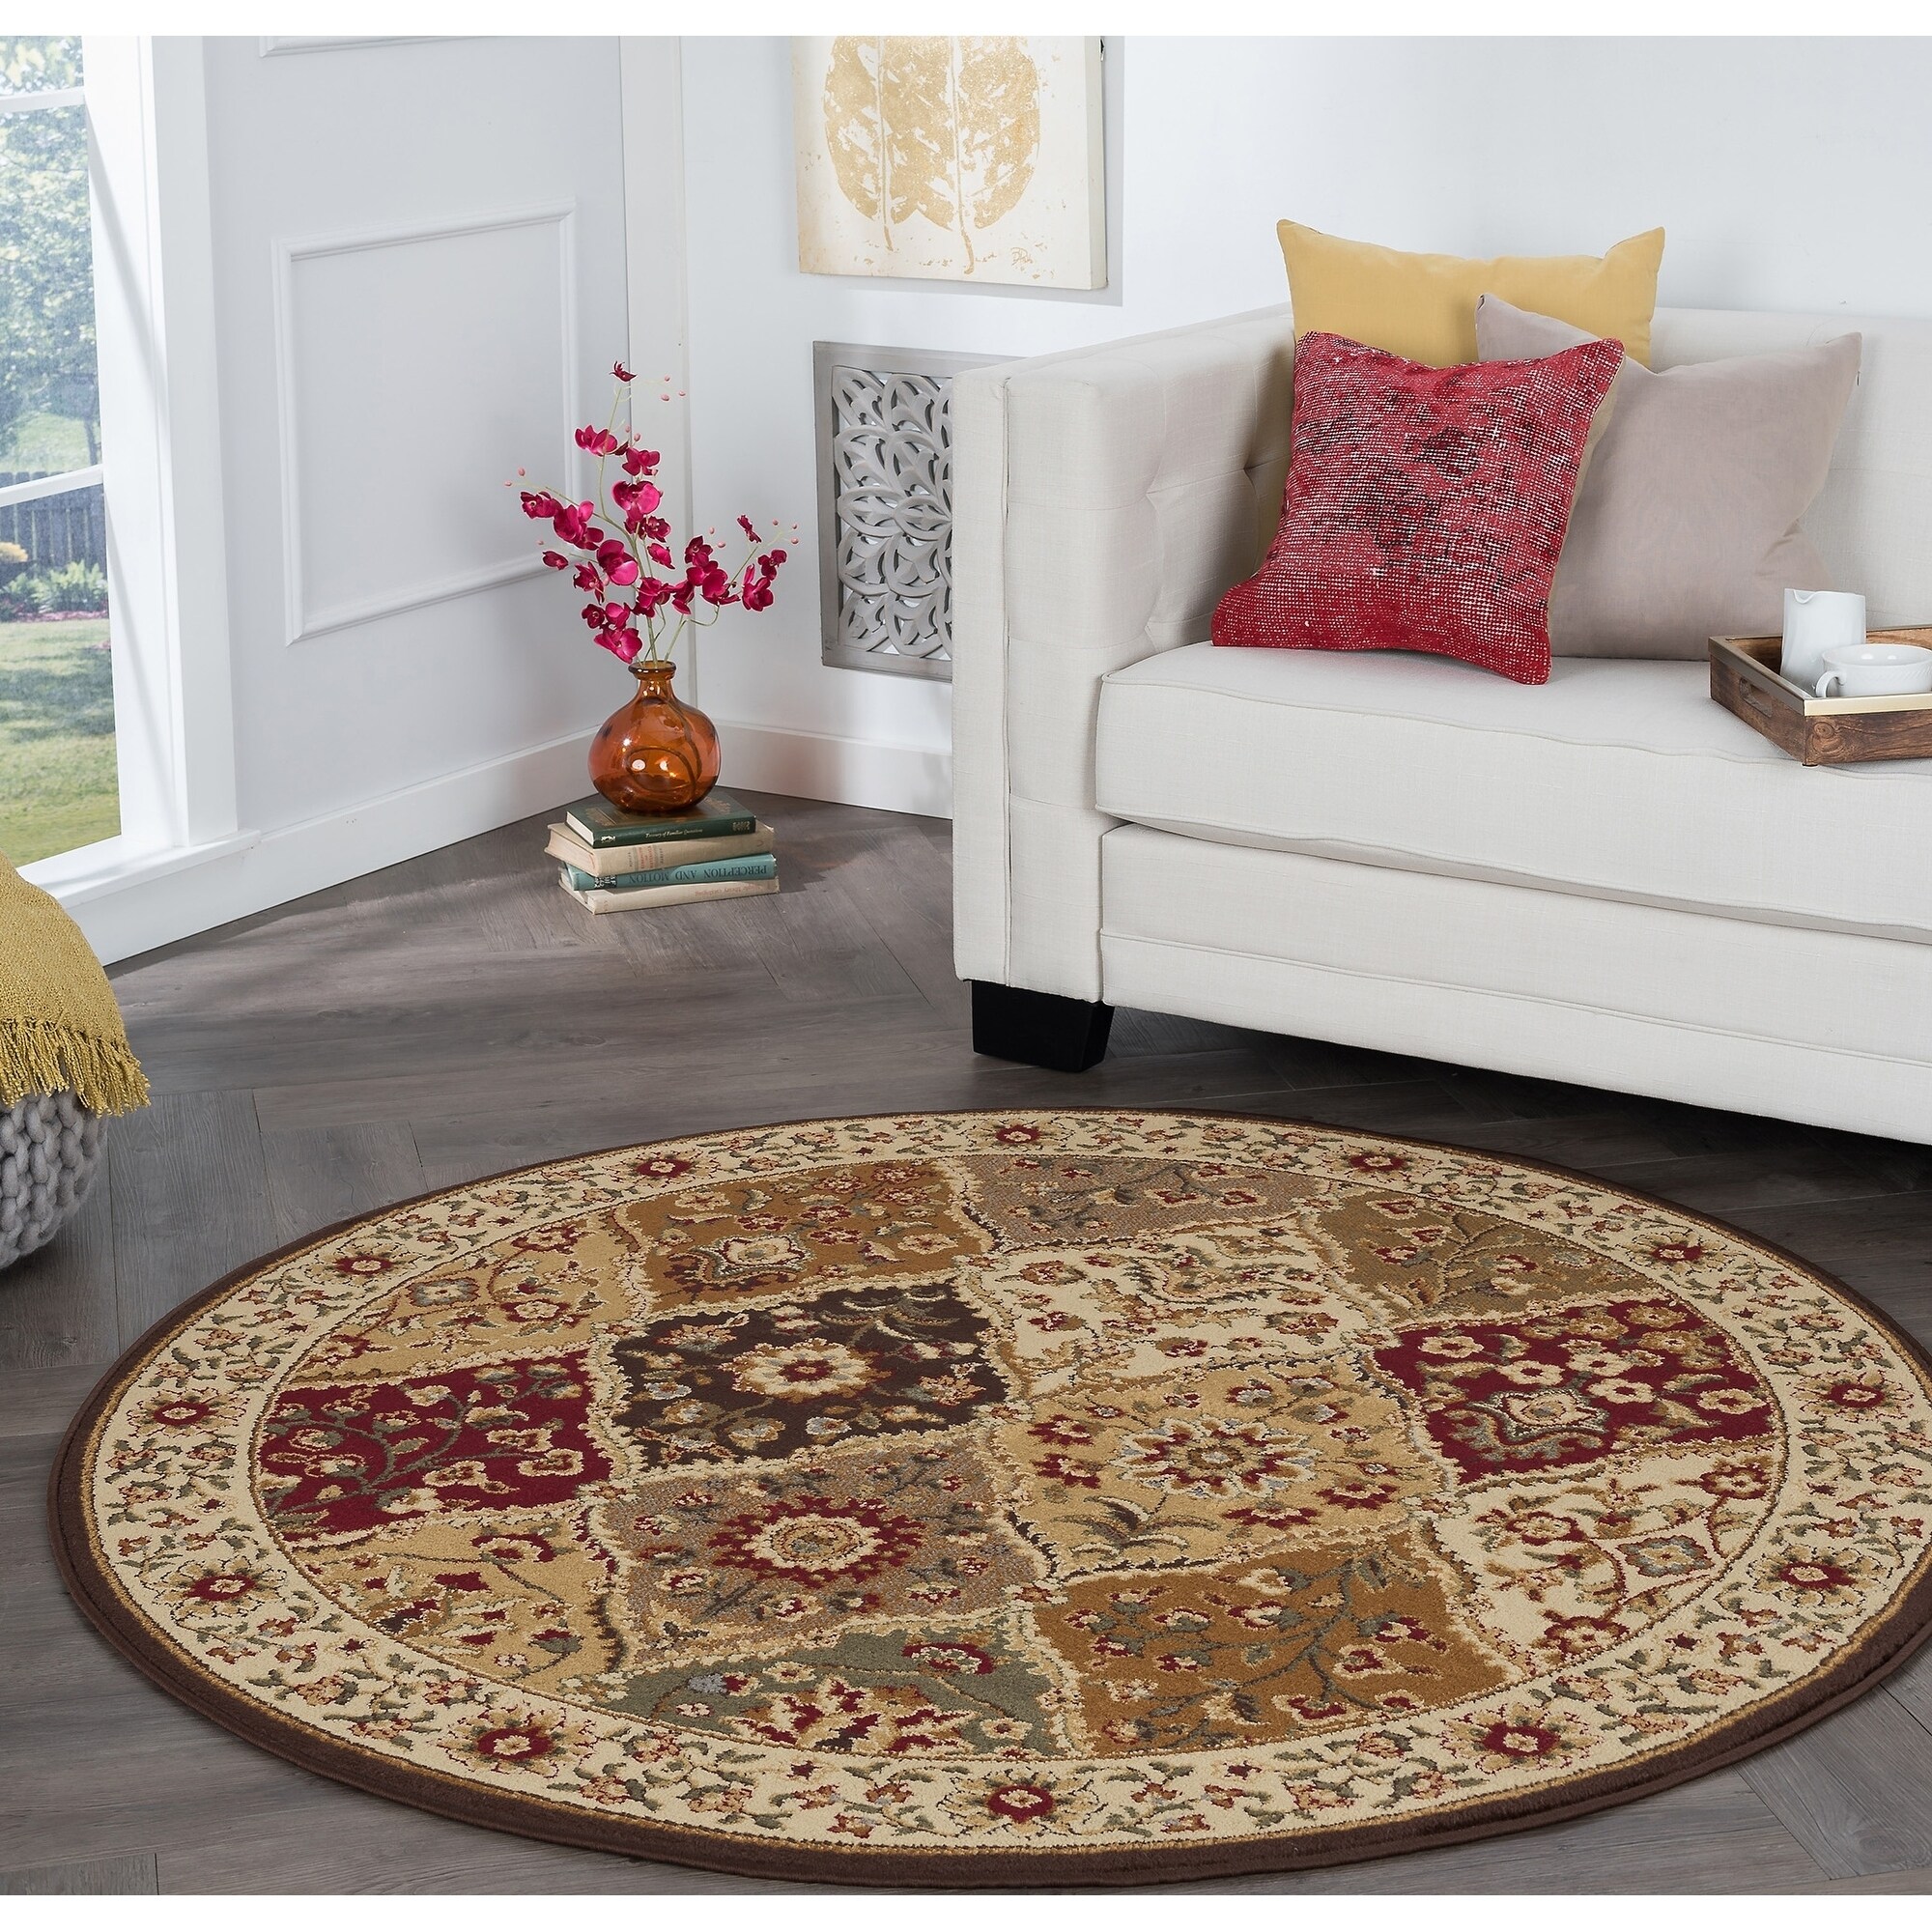 Rhythm 105120 Multi Traditional Area Rug (5 3 Round) (MultiSecondary Colors Beige, red, brown, blue, greenShape RectangleTip We recommend the use of a non skid pad to keep the rug in place on smooth surfaces.All rug sizes are approximate. Due to the di